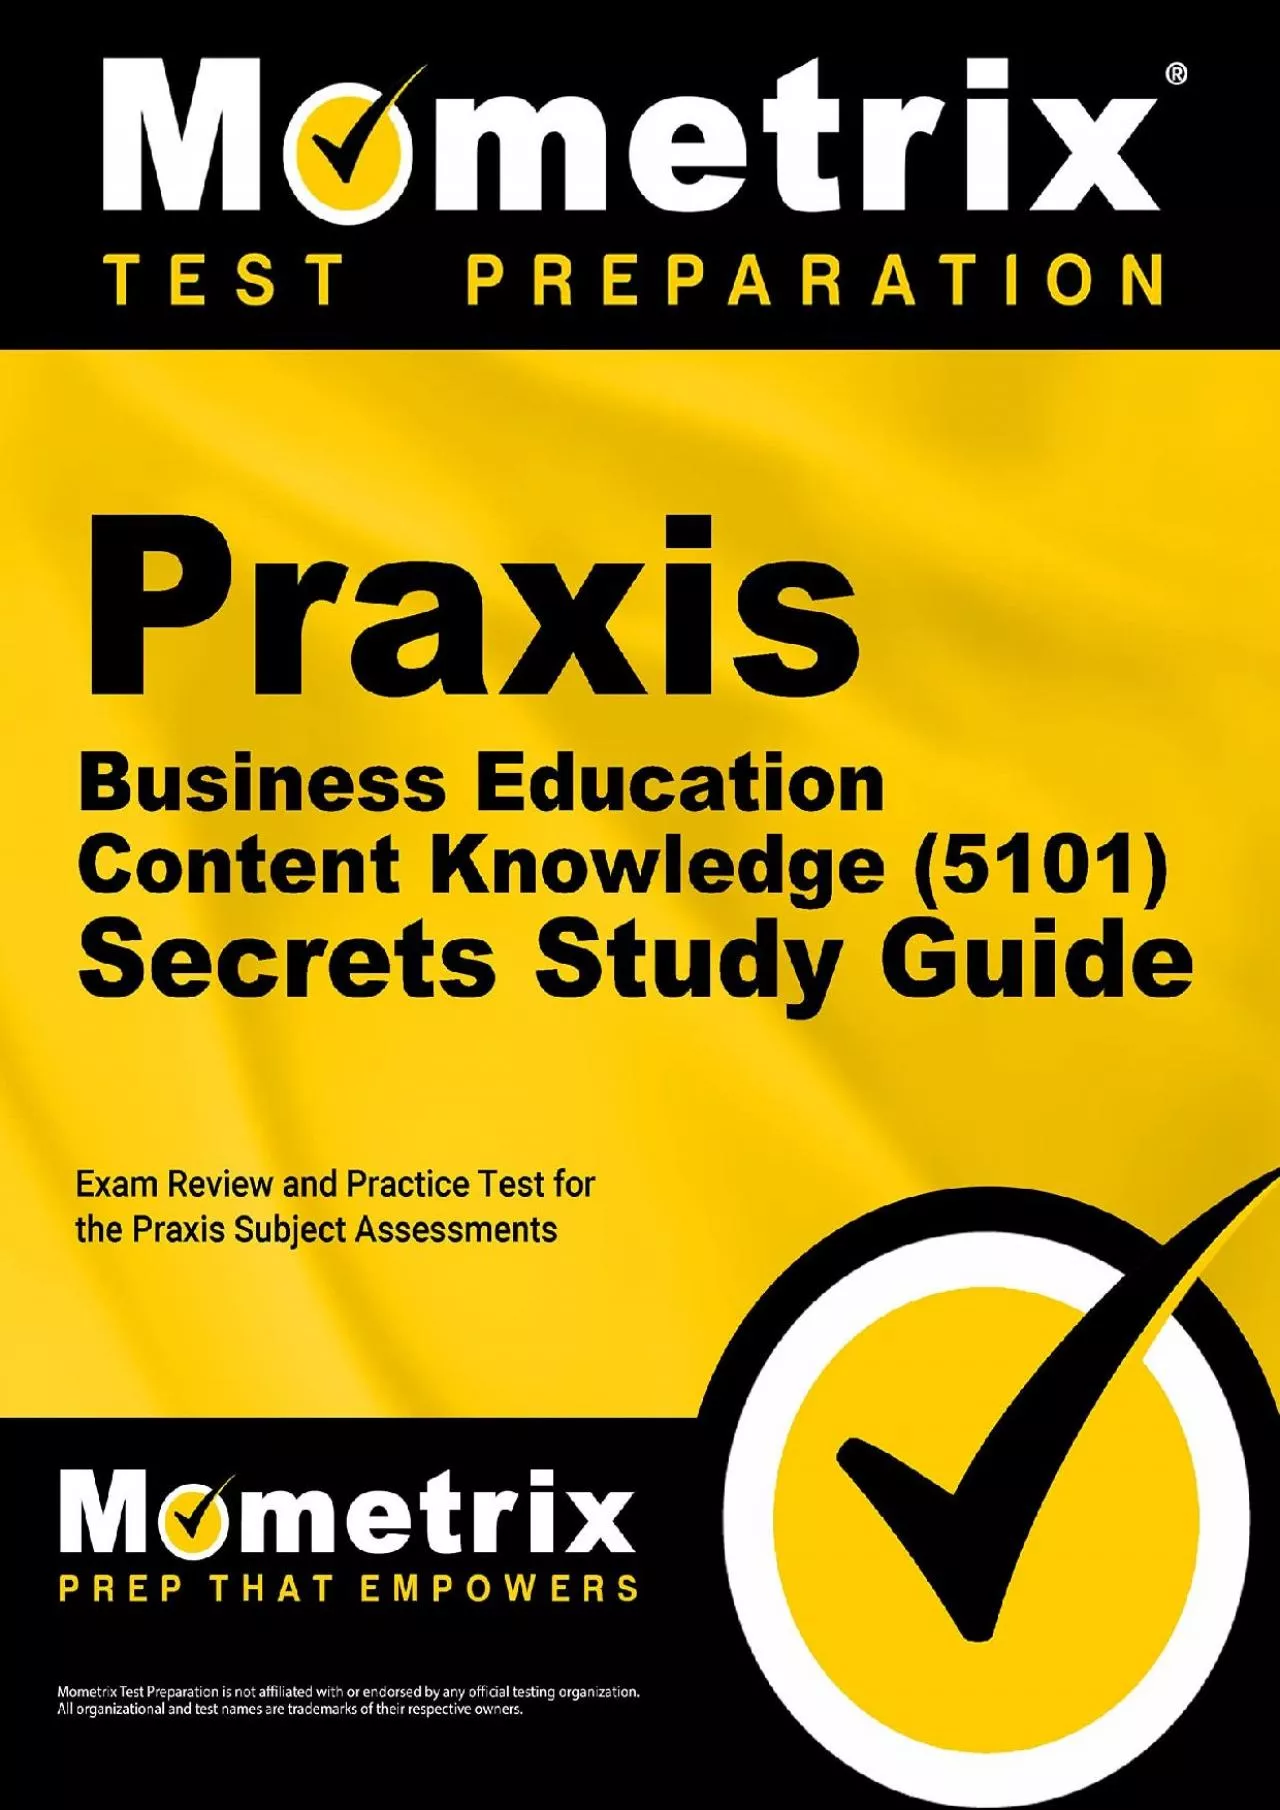 [DOWNLOAD] Praxis Business Education: Content Knowledge 5101 Secrets Study Guide - Exam